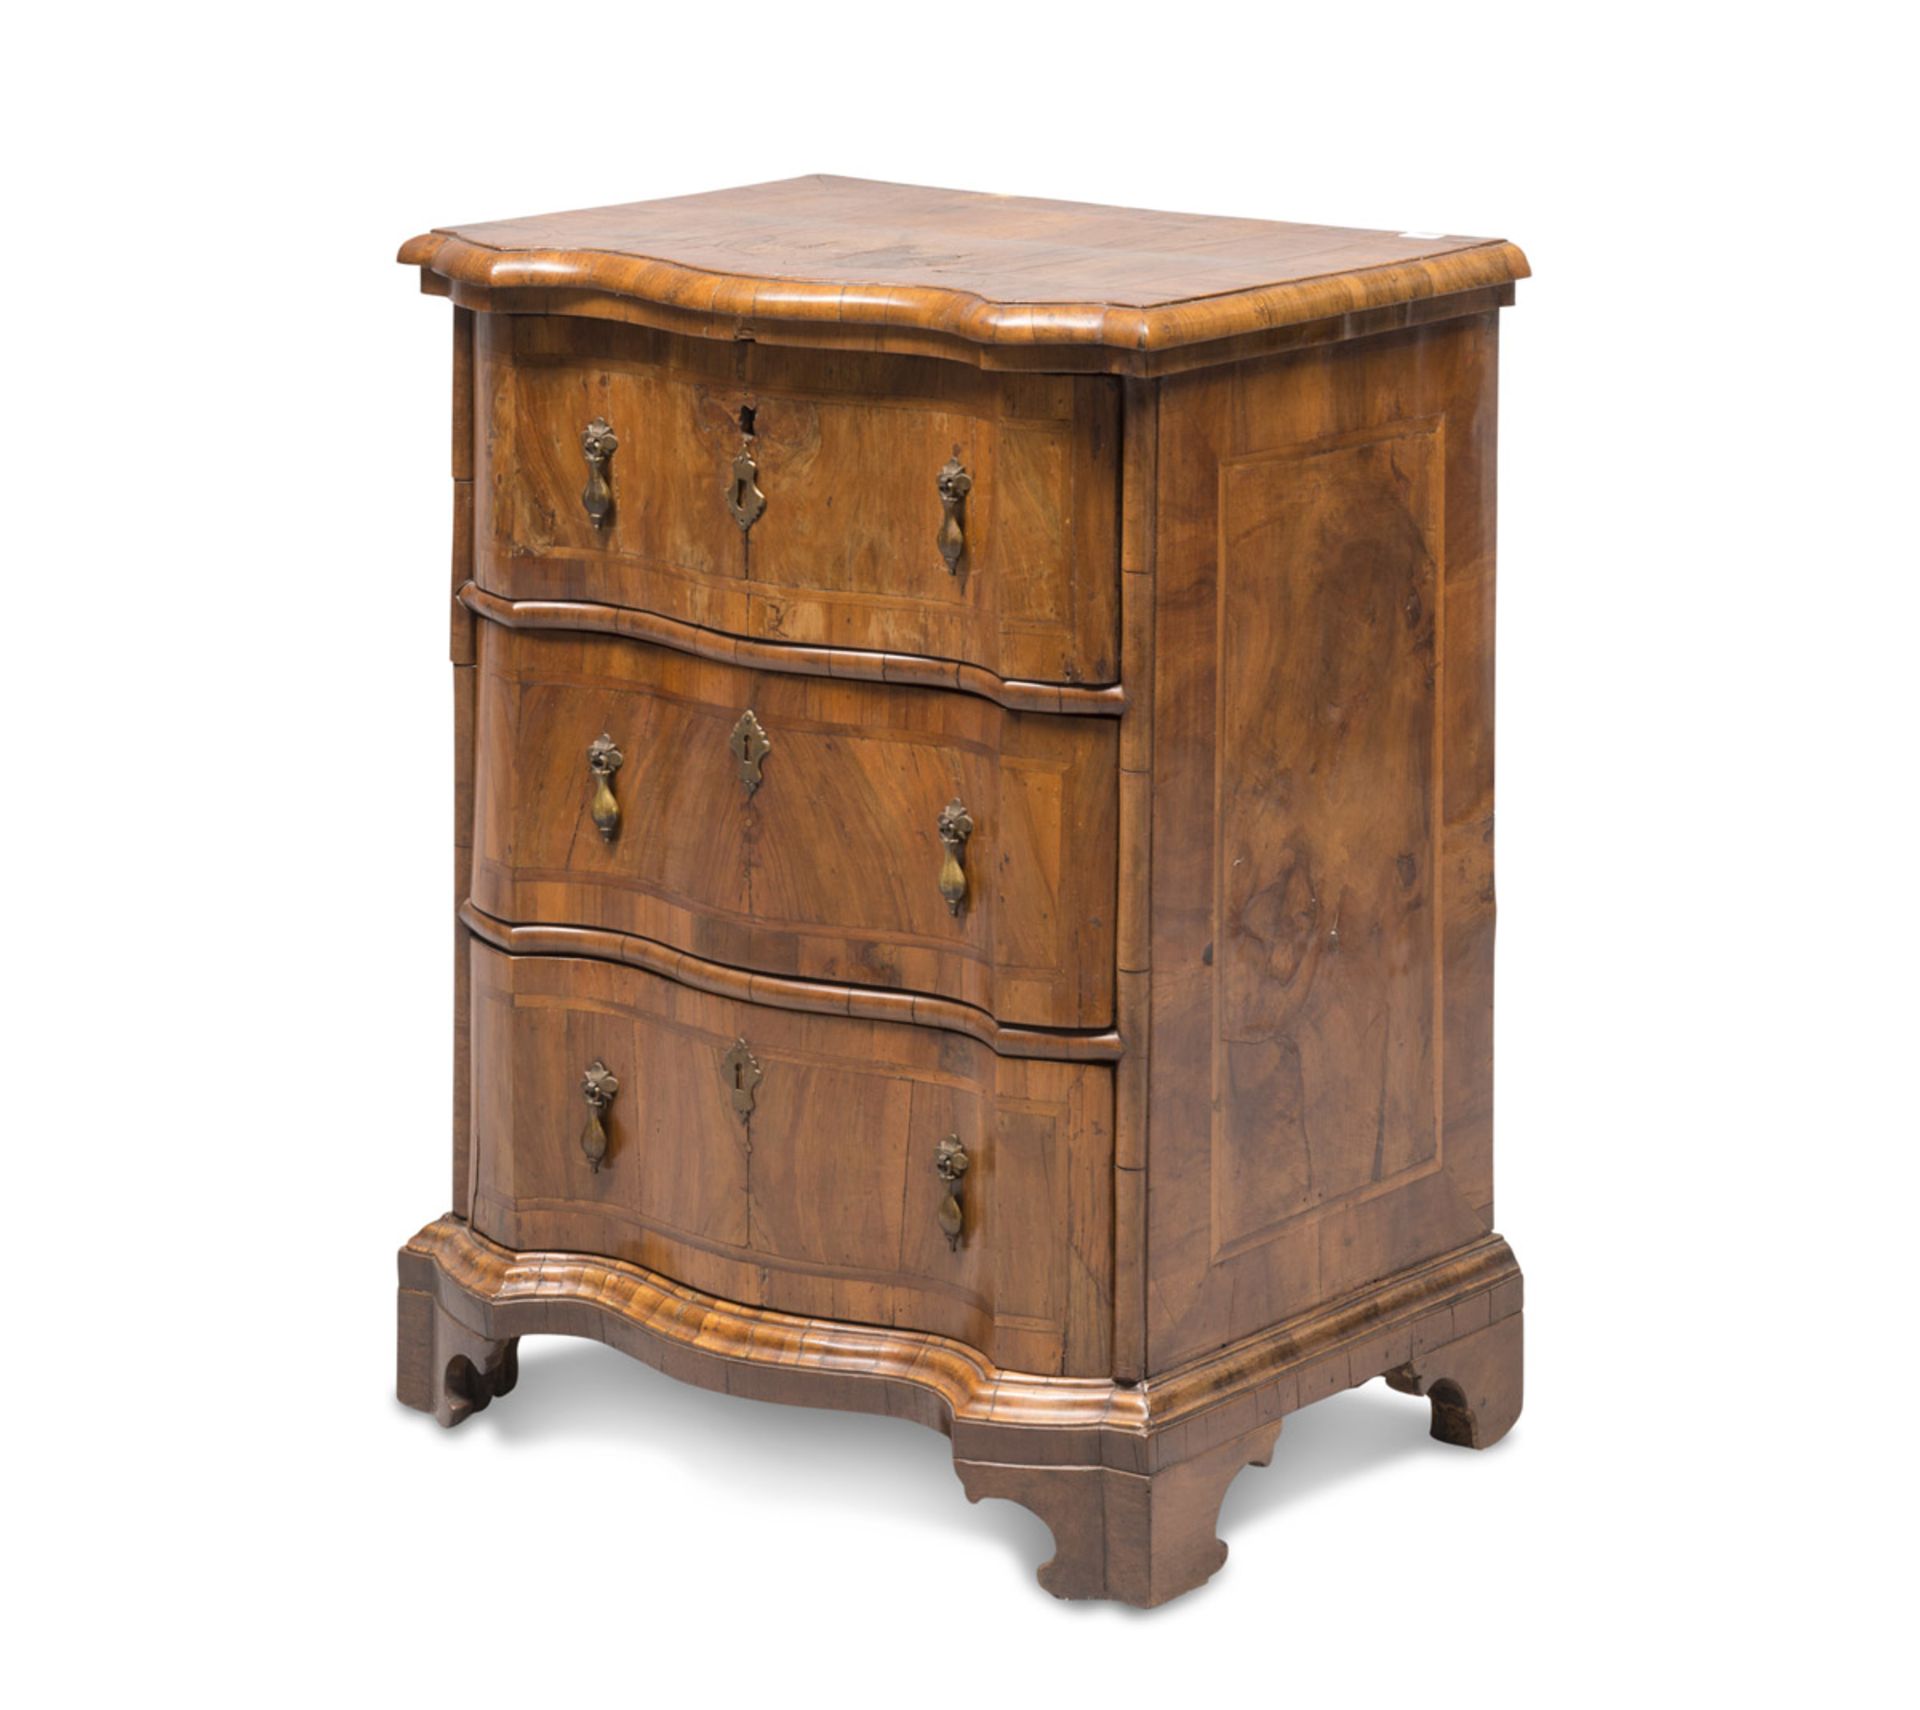 SMALL COMMODE IN WALNUT AND BRIAR WALNUT, EMILIA SECOLO molded edges with threads in boxwood,